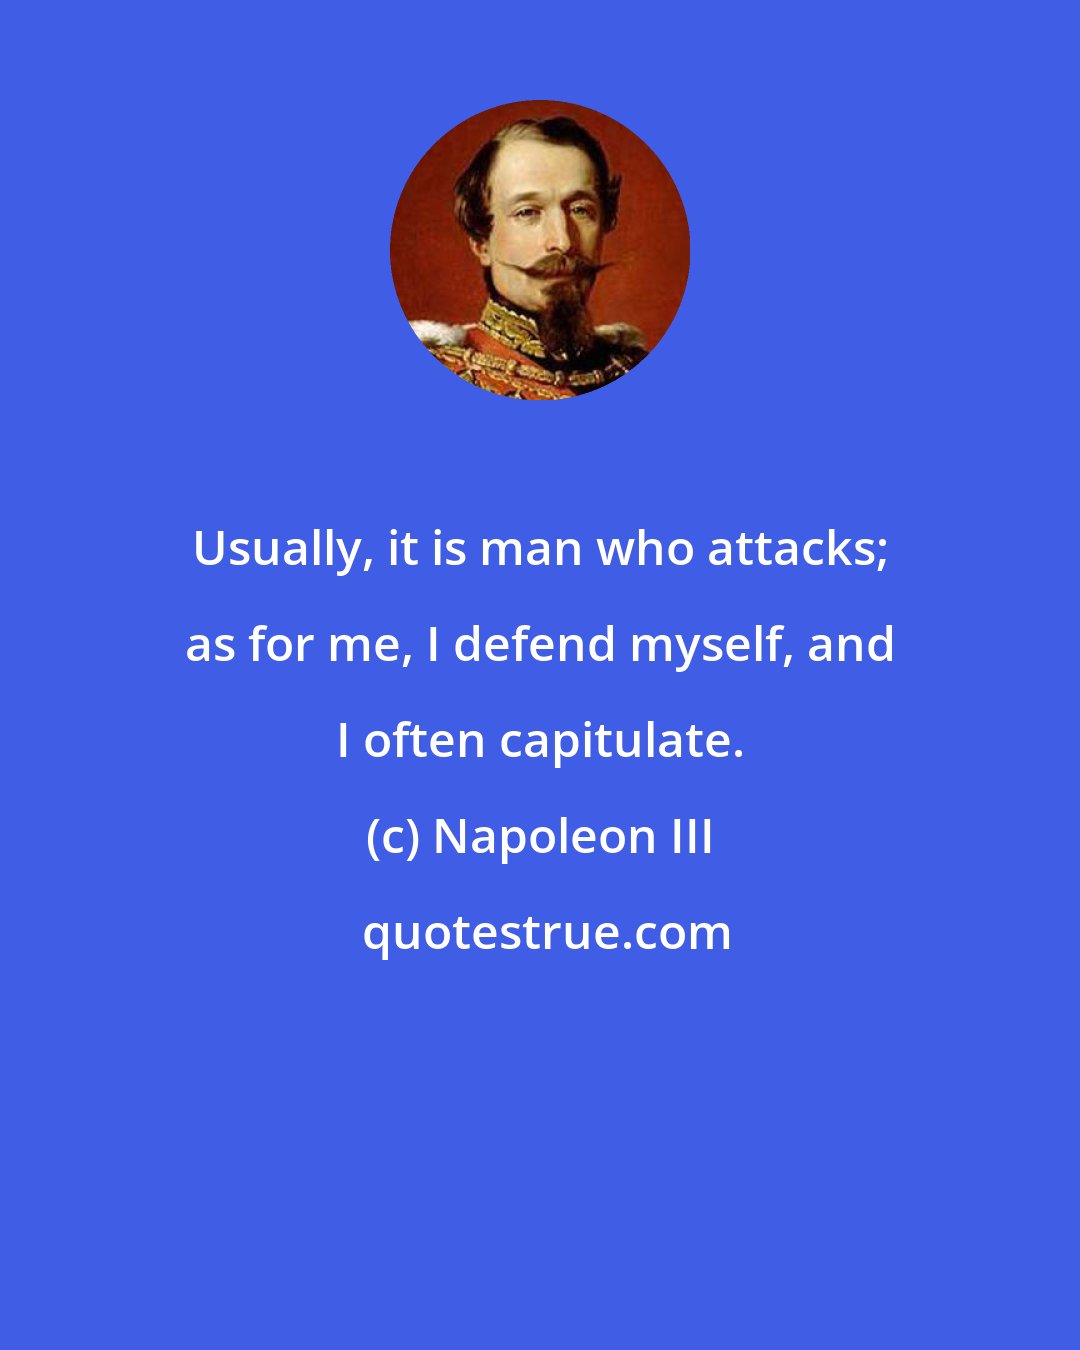 Napoleon III: Usually, it is man who attacks; as for me, I defend myself, and I often capitulate.